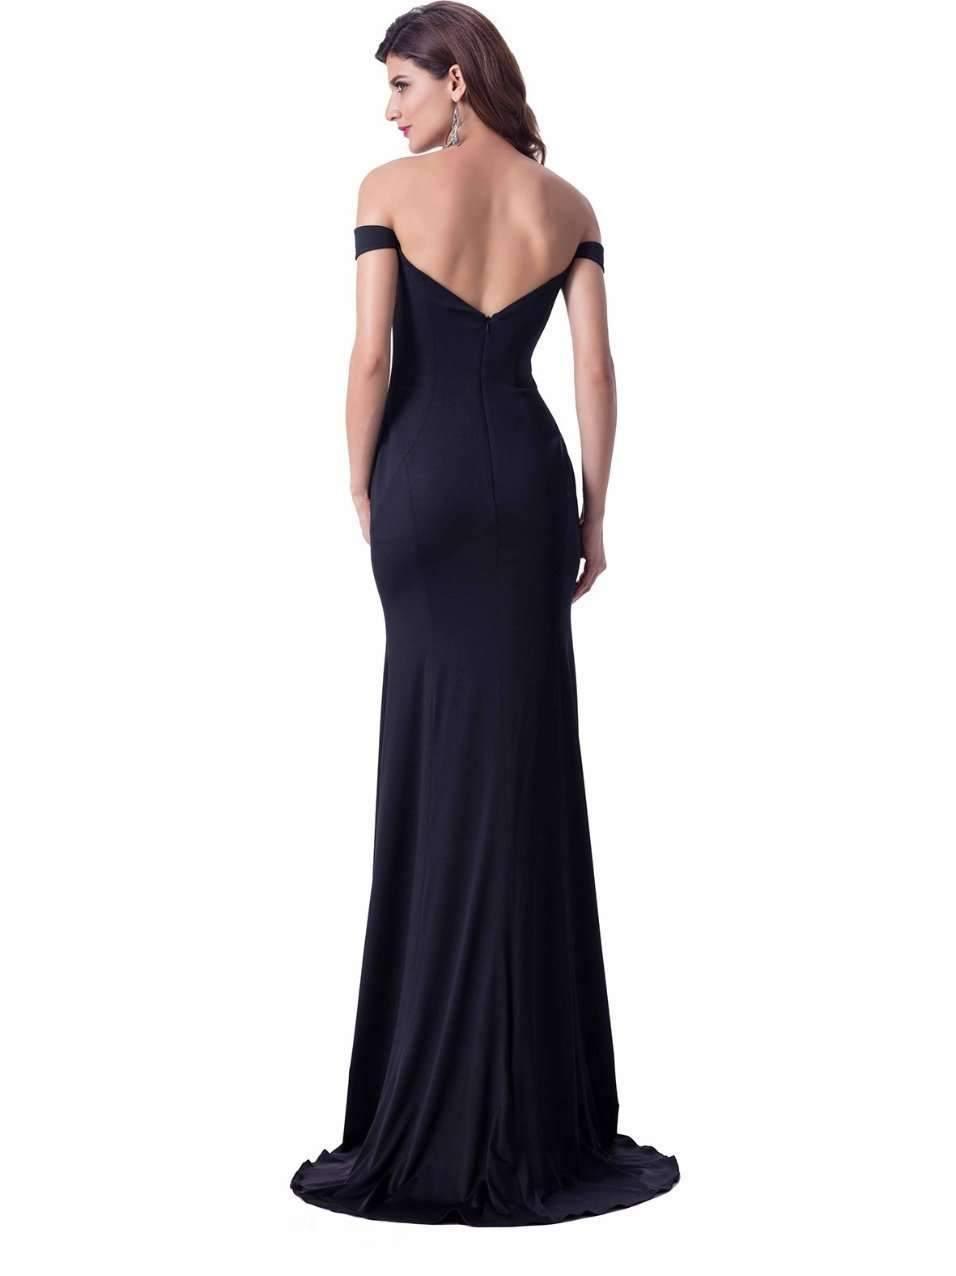 UK10 NAVY - CONSTANZA - Adore Bridal and Occasion Wear